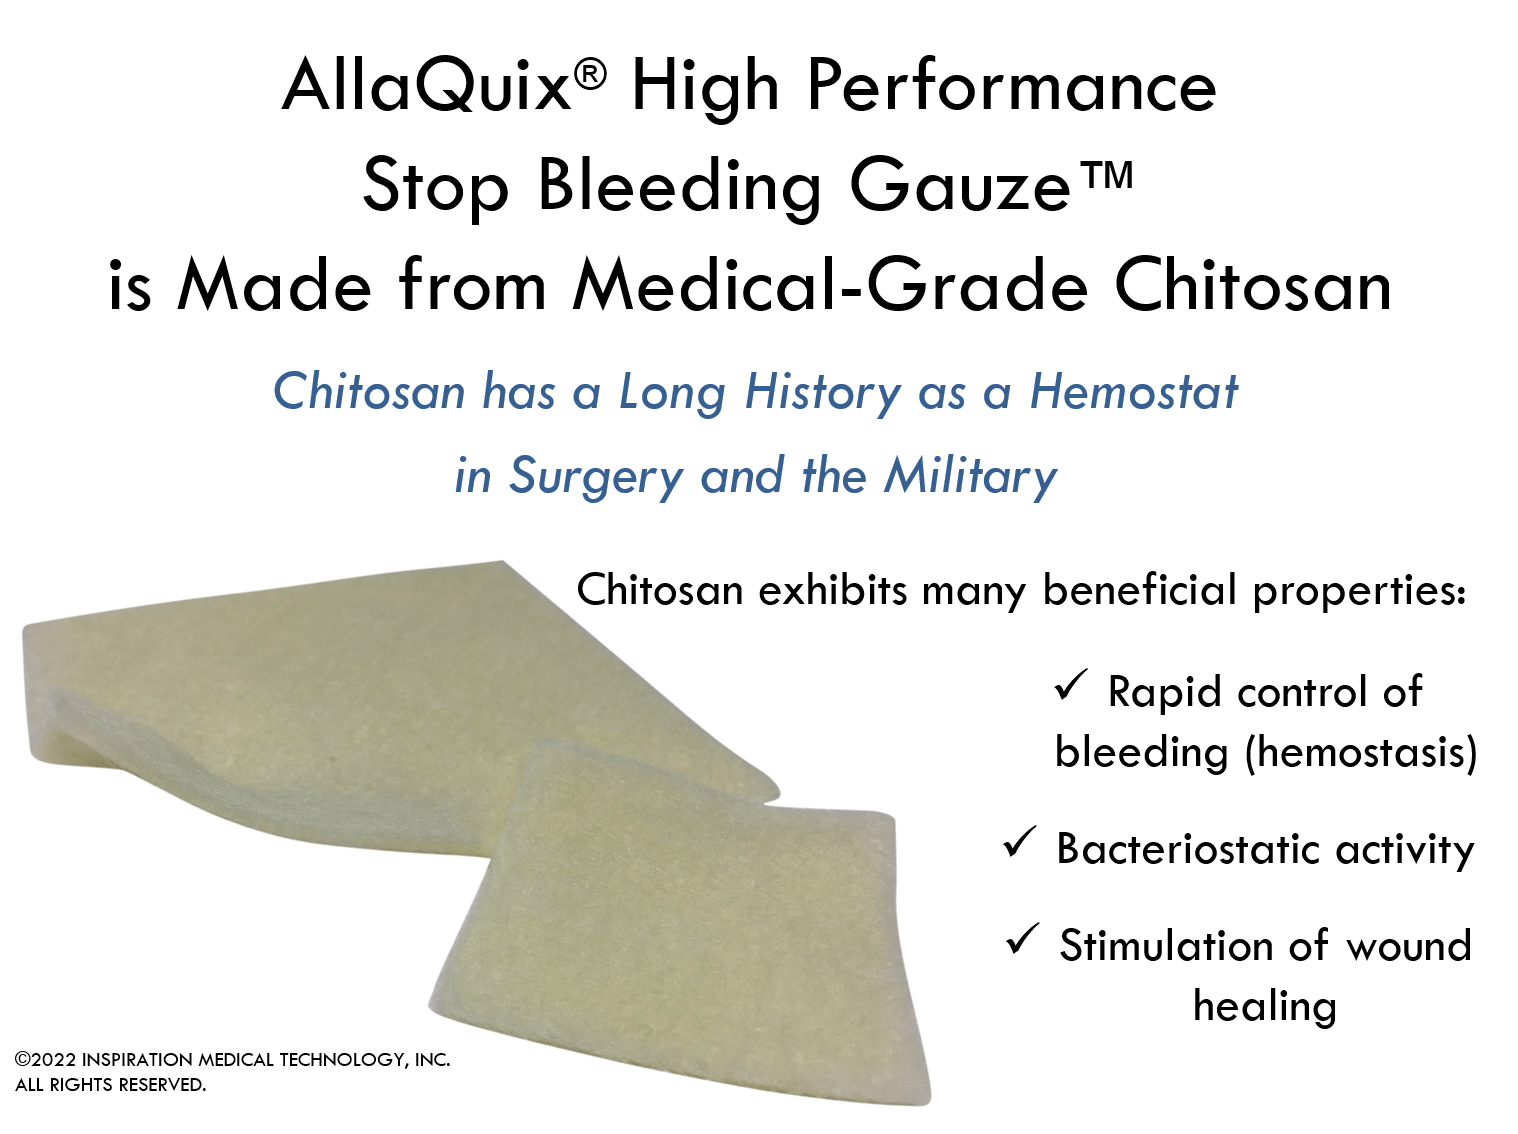 Chitosan has a long history as a hemostat in surgery and the military. Chitosan causes the rapid control of bleeding called hemostasis. Chitosan also has antimicrobial activity and stimulates wound healing.